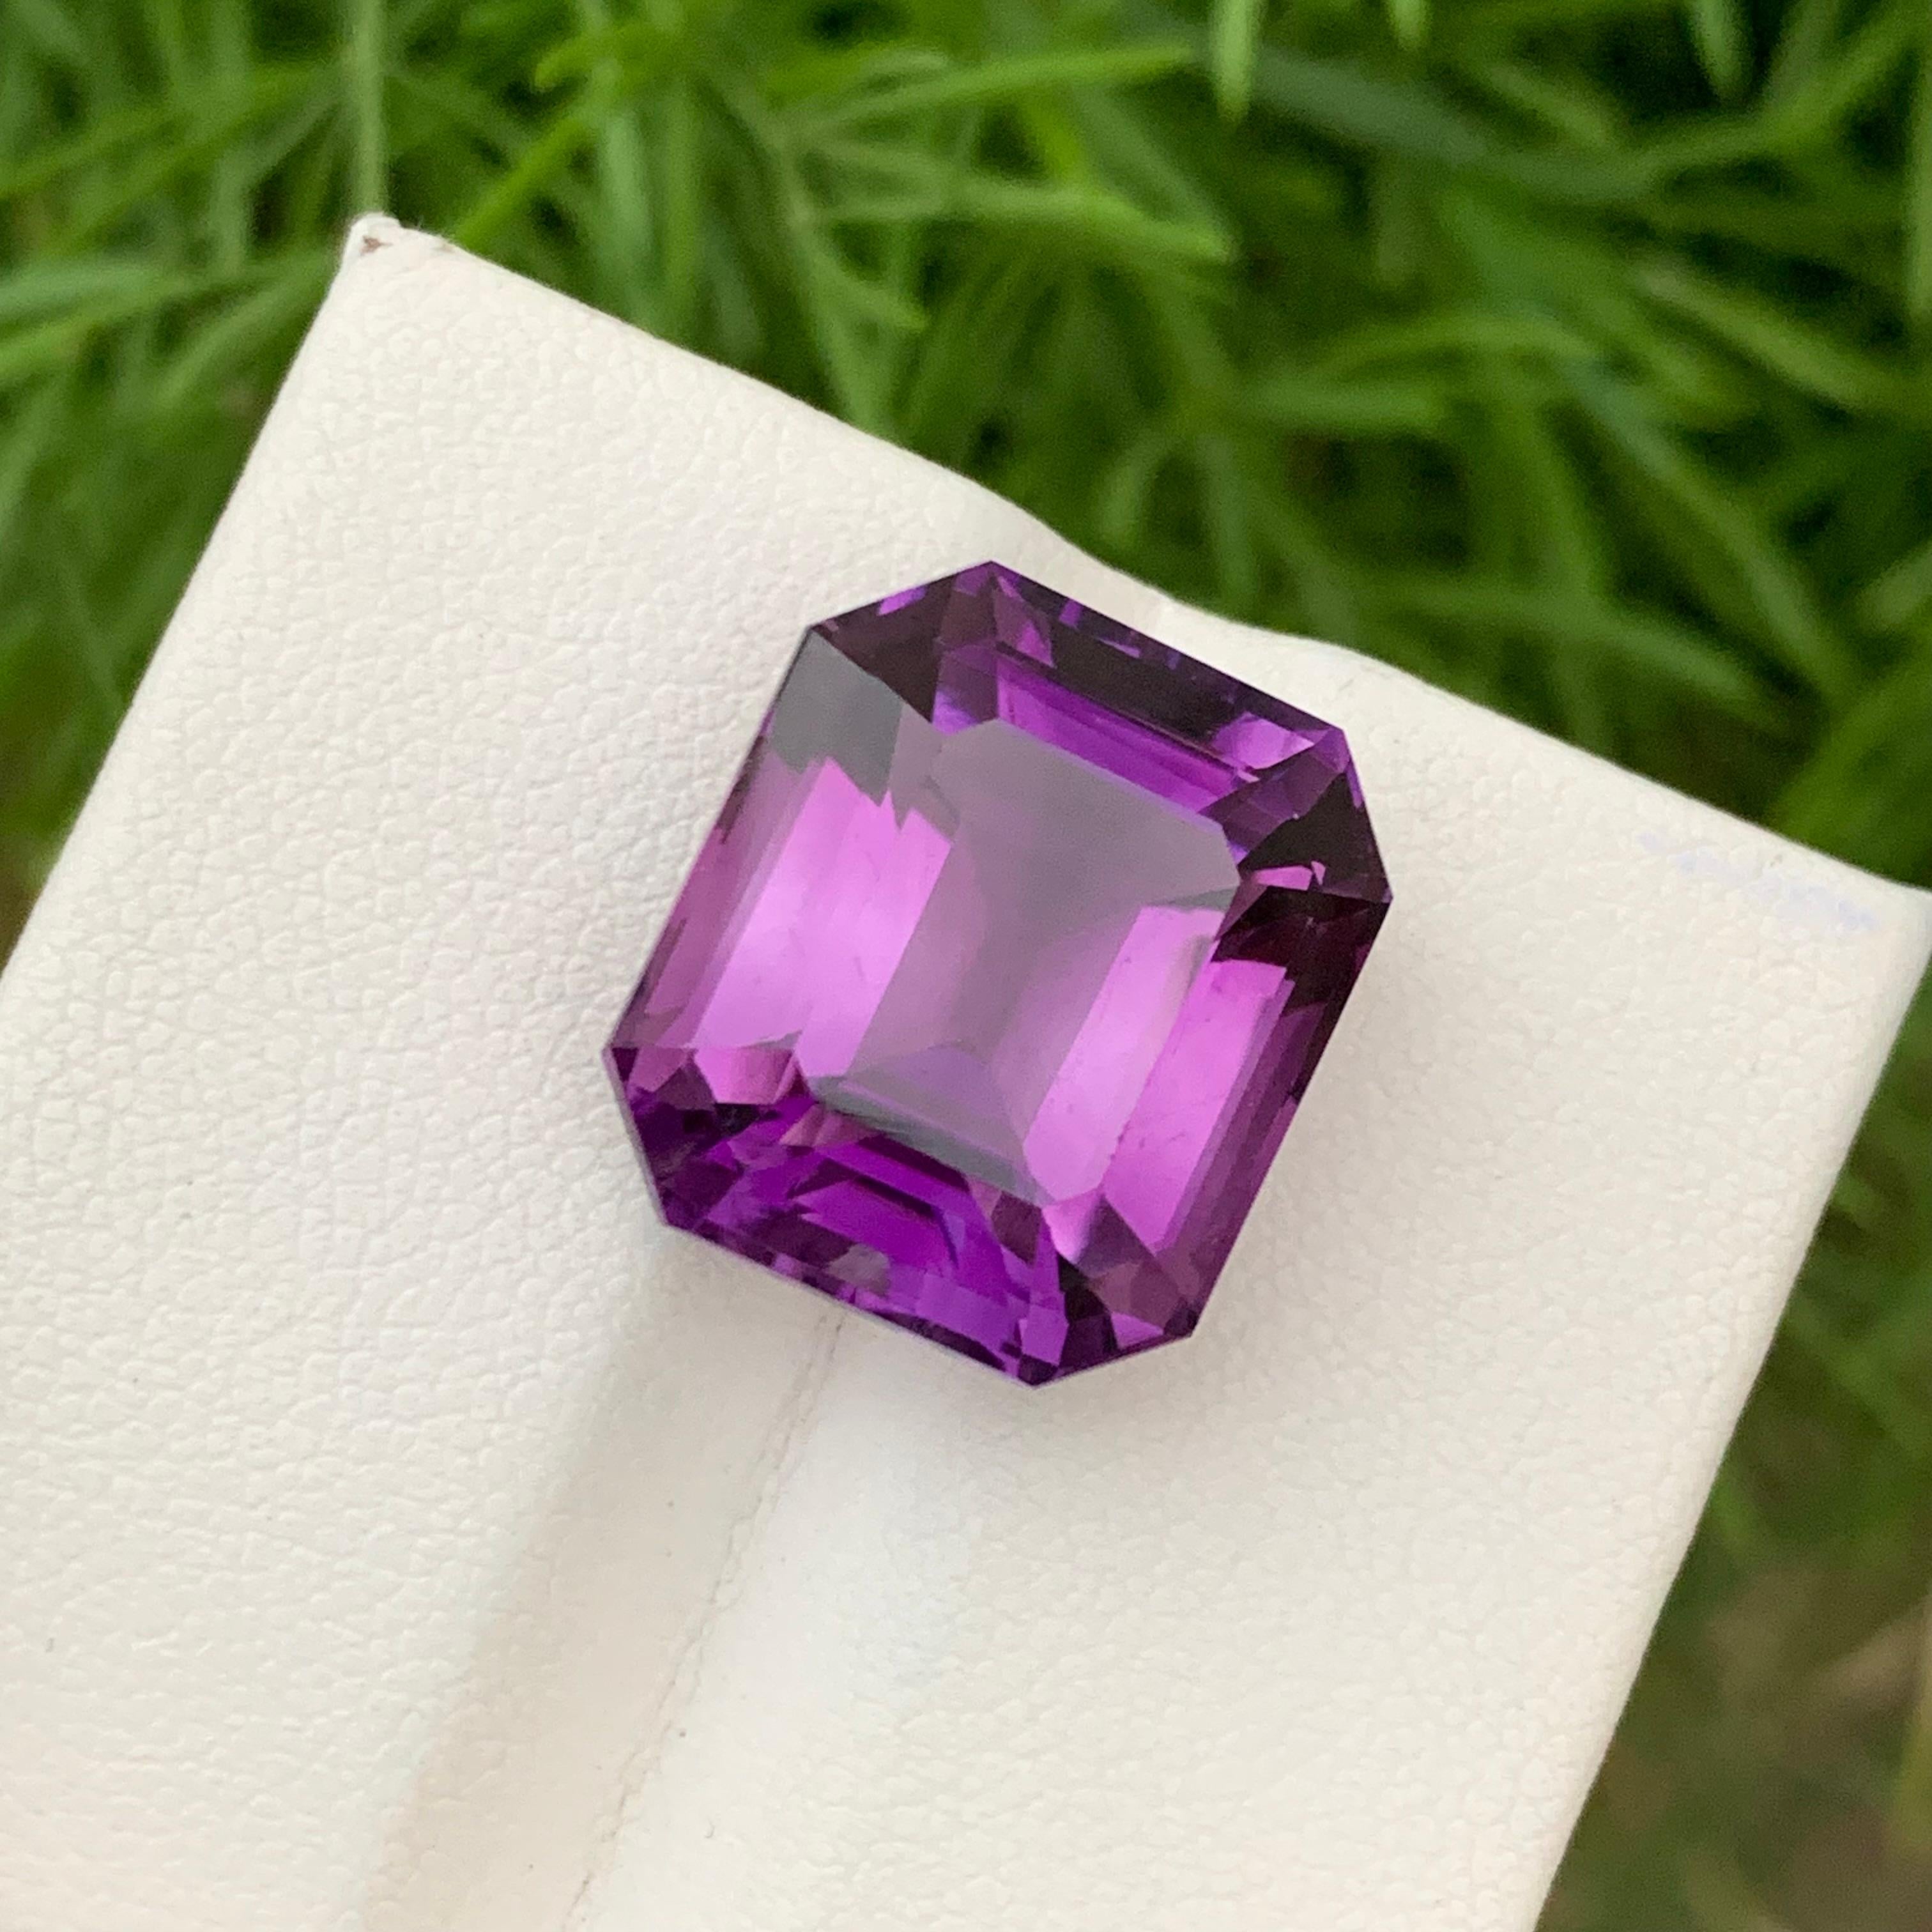 Arts and Crafts 19.0 Carats Natural Loose Deep Purple Amethyst Gemstone From Brazil Mine For Sale